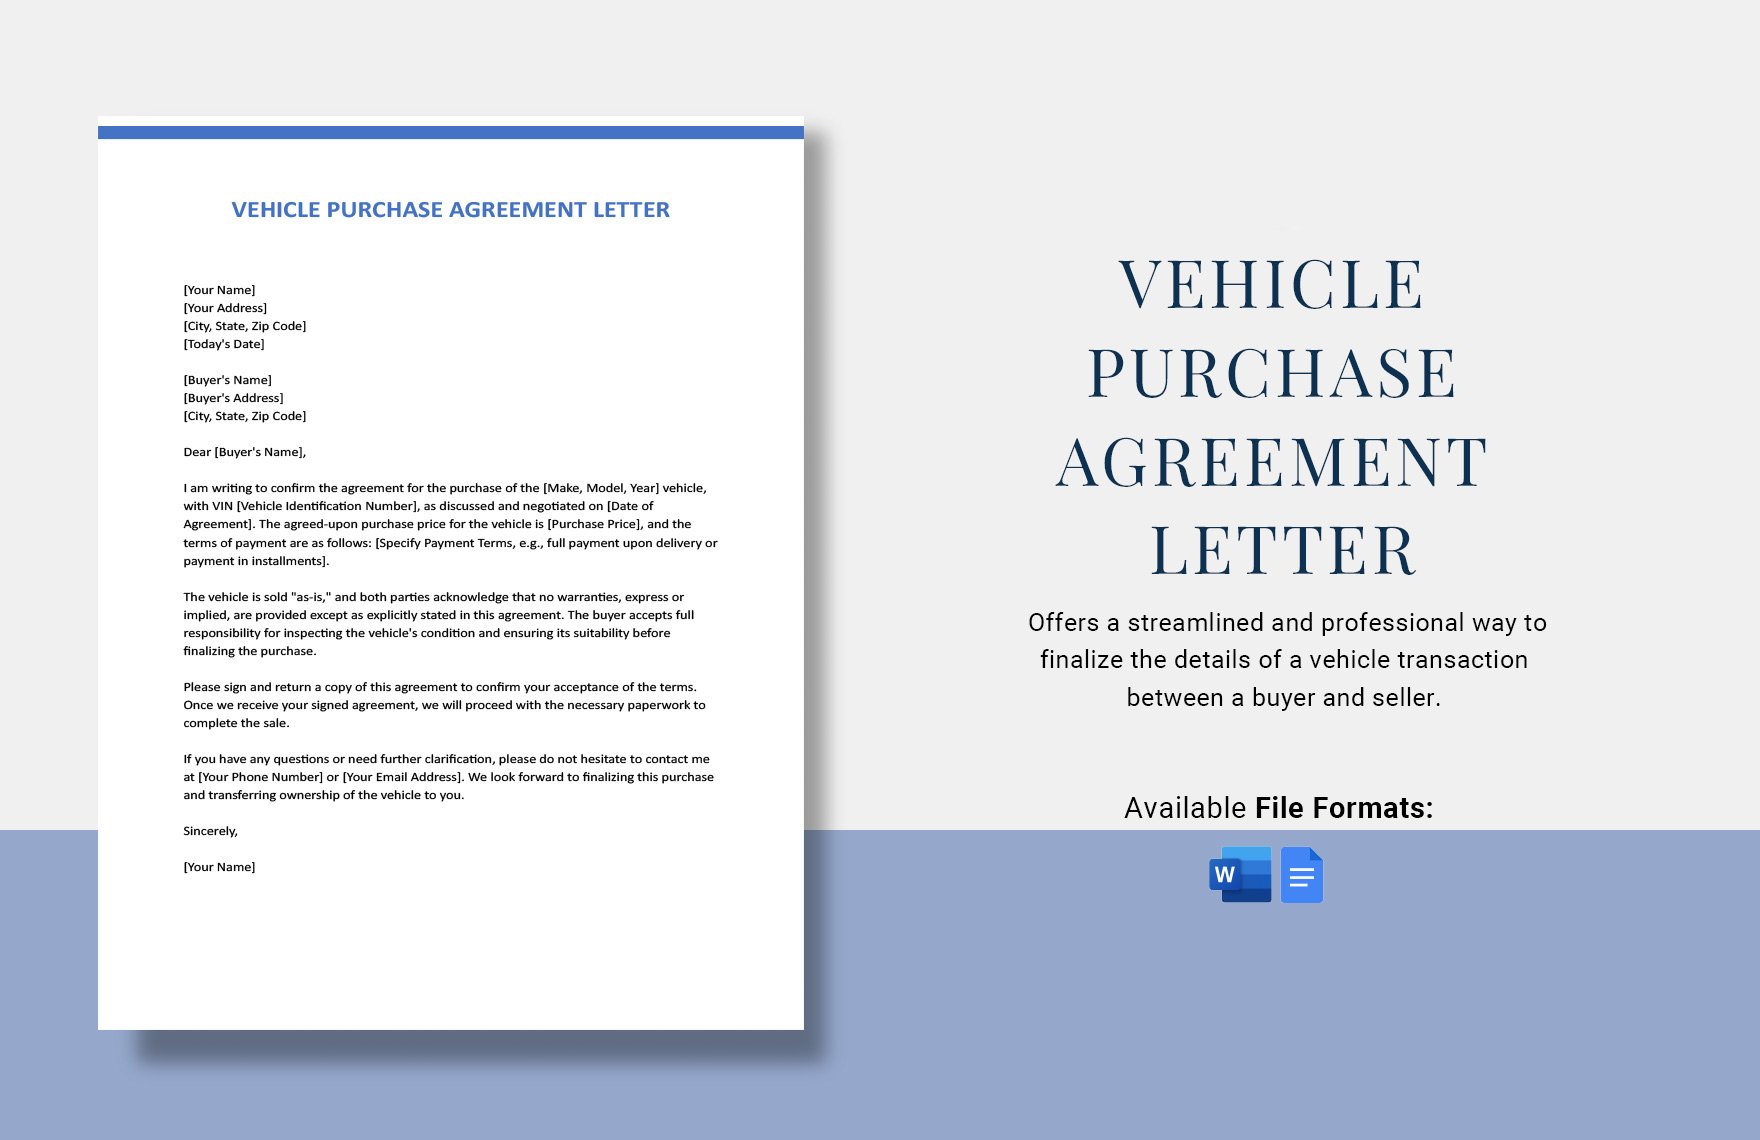 Vehicle Purchase Agreement Letter in Word, Google Docs